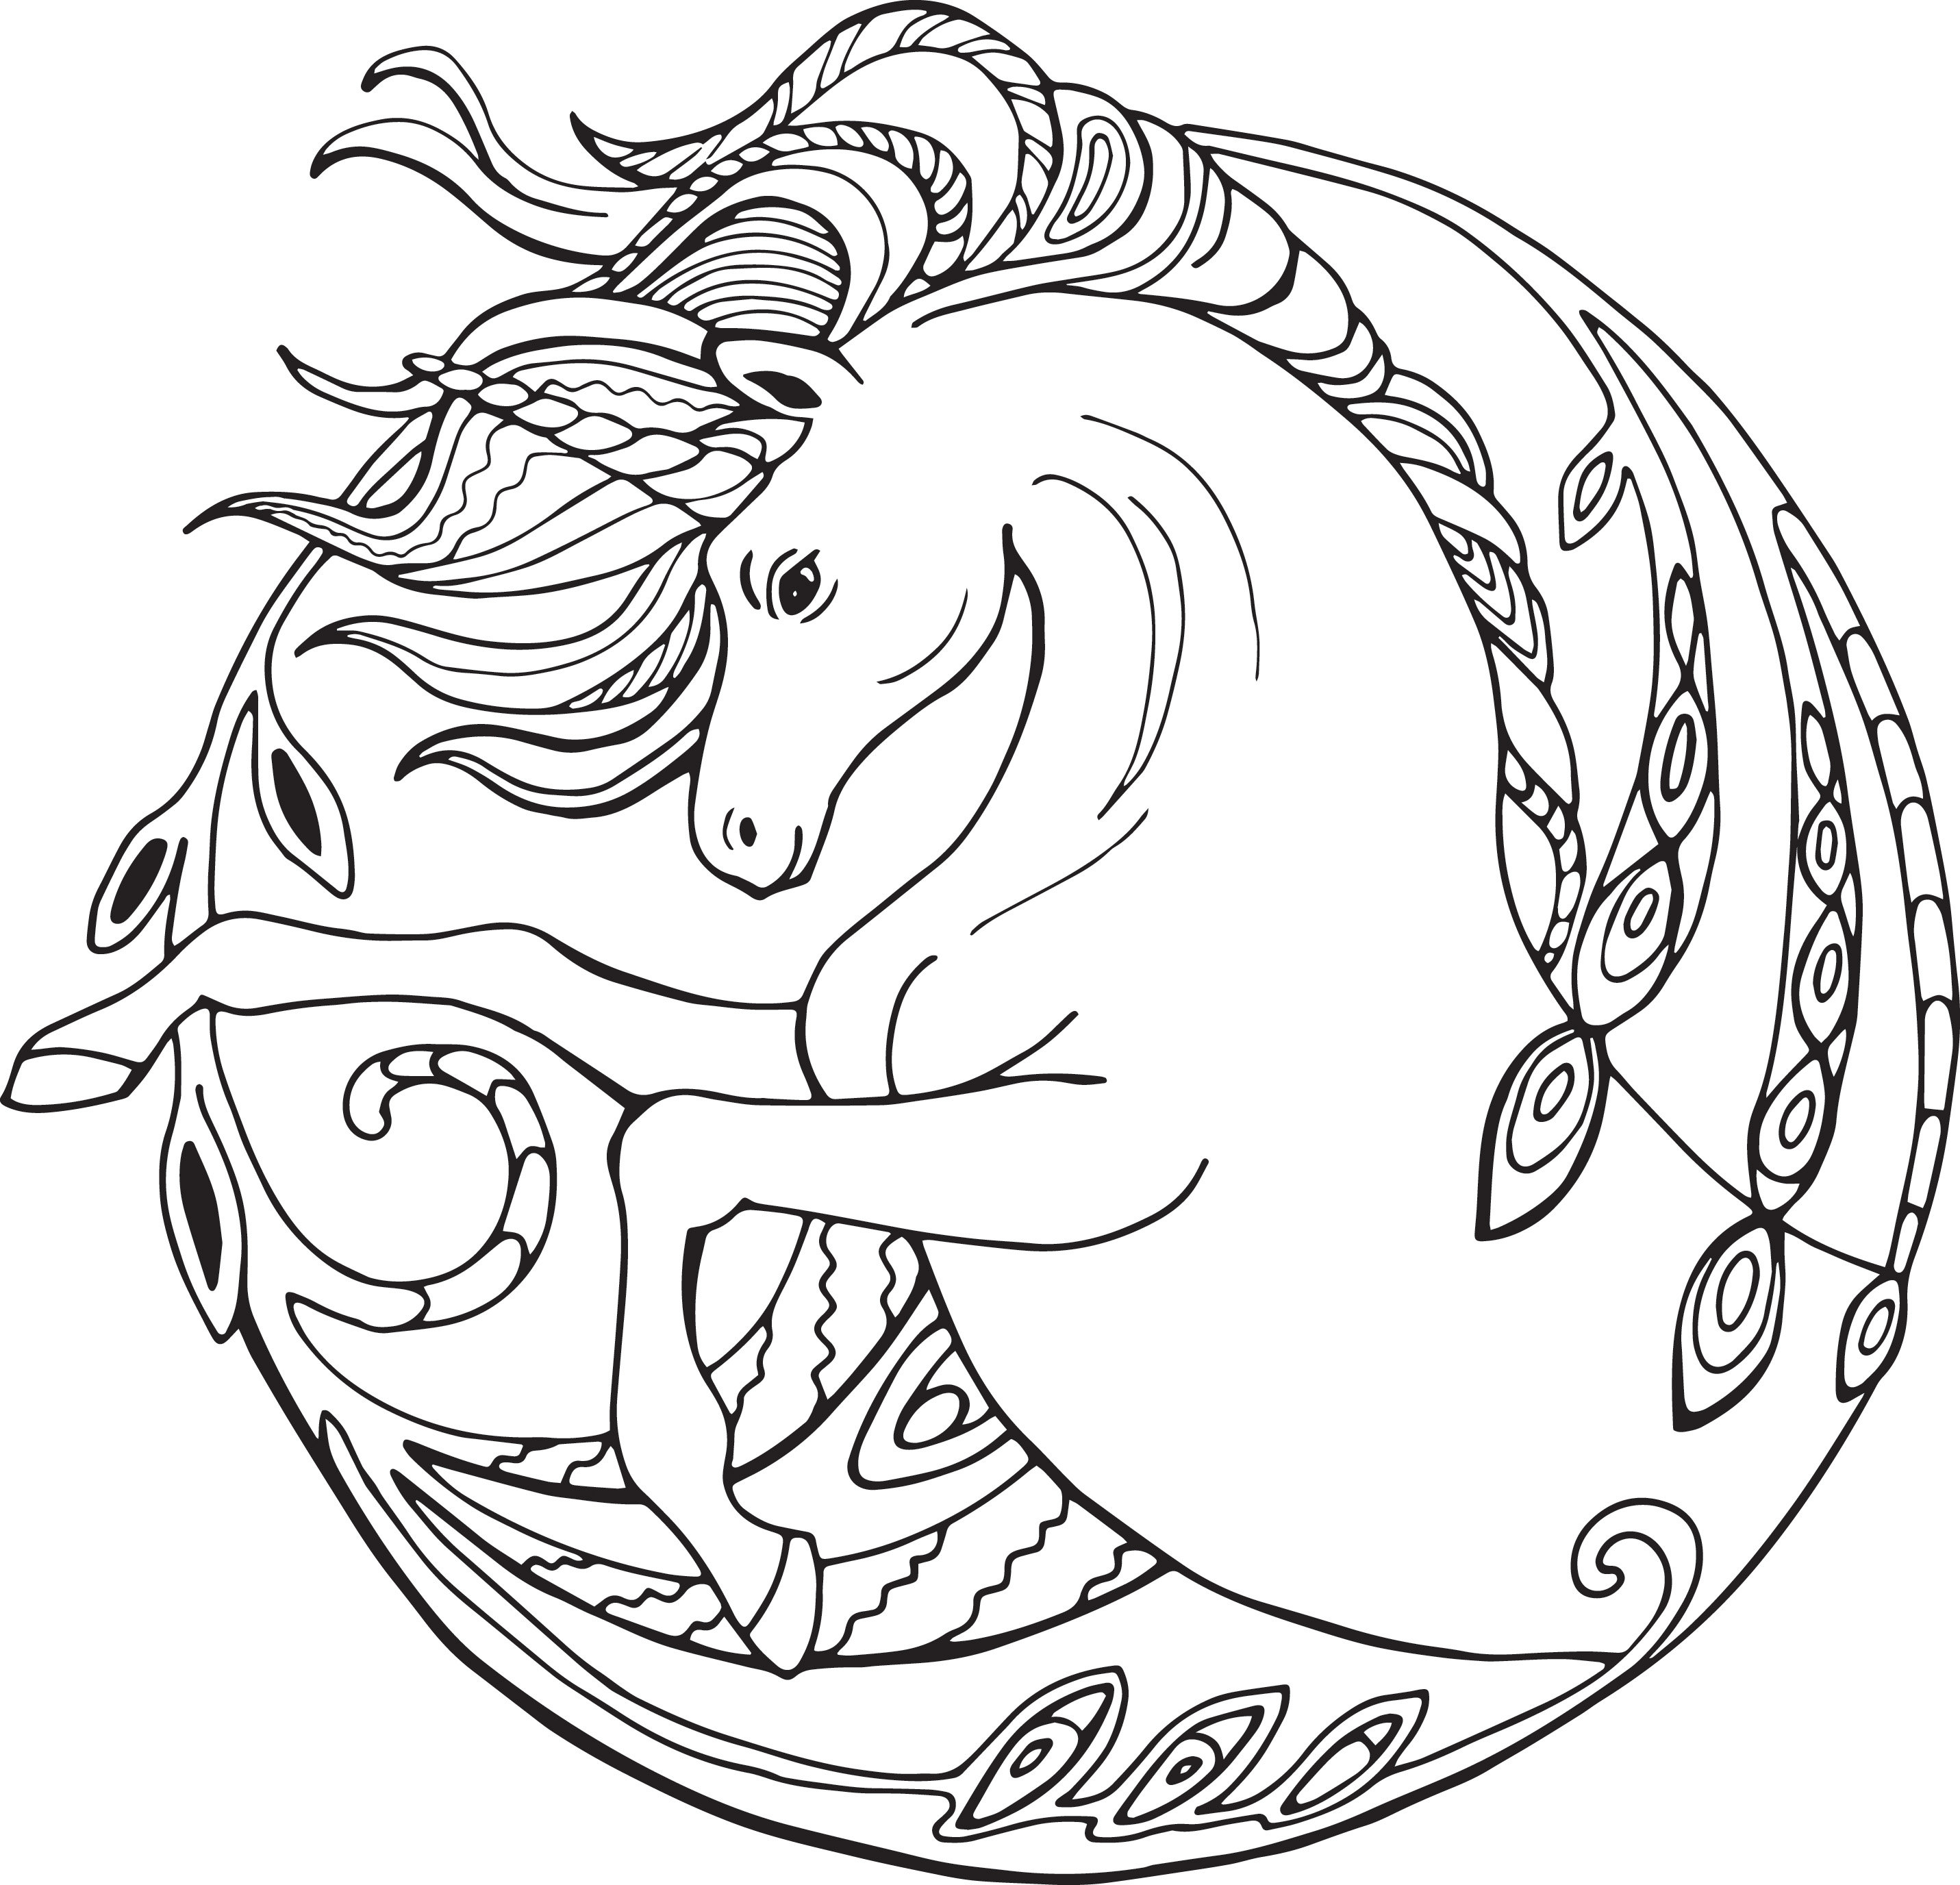 Unicorn coloring pages for adults printable coloring pages instant download jpg instant download